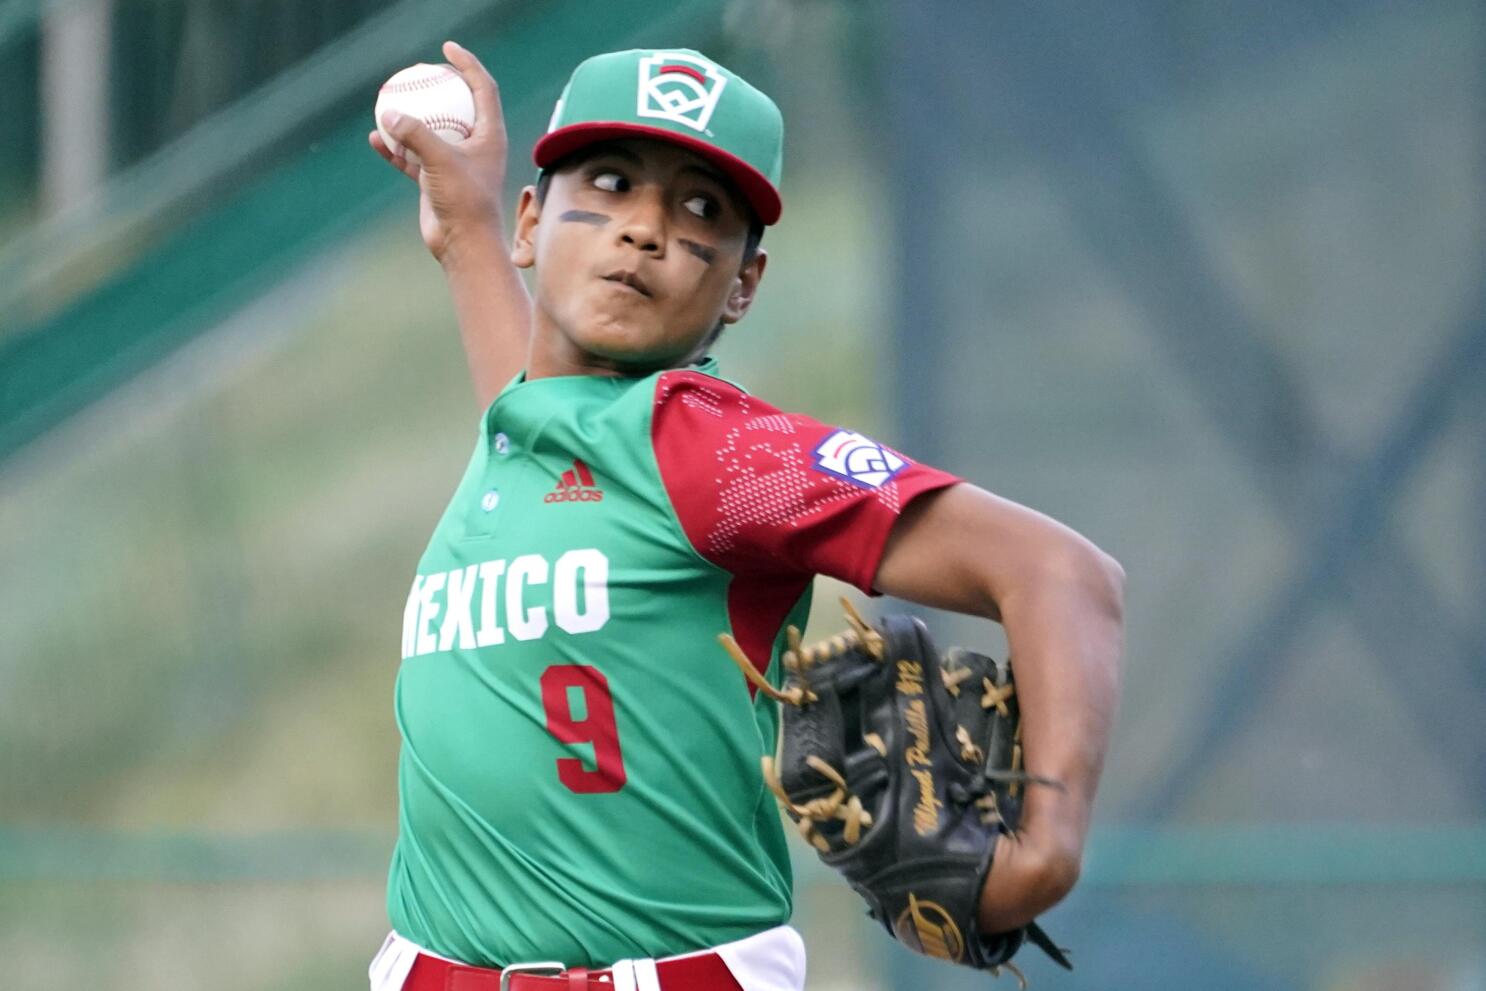 Why are there so few Major League Baseball players from Mexico?